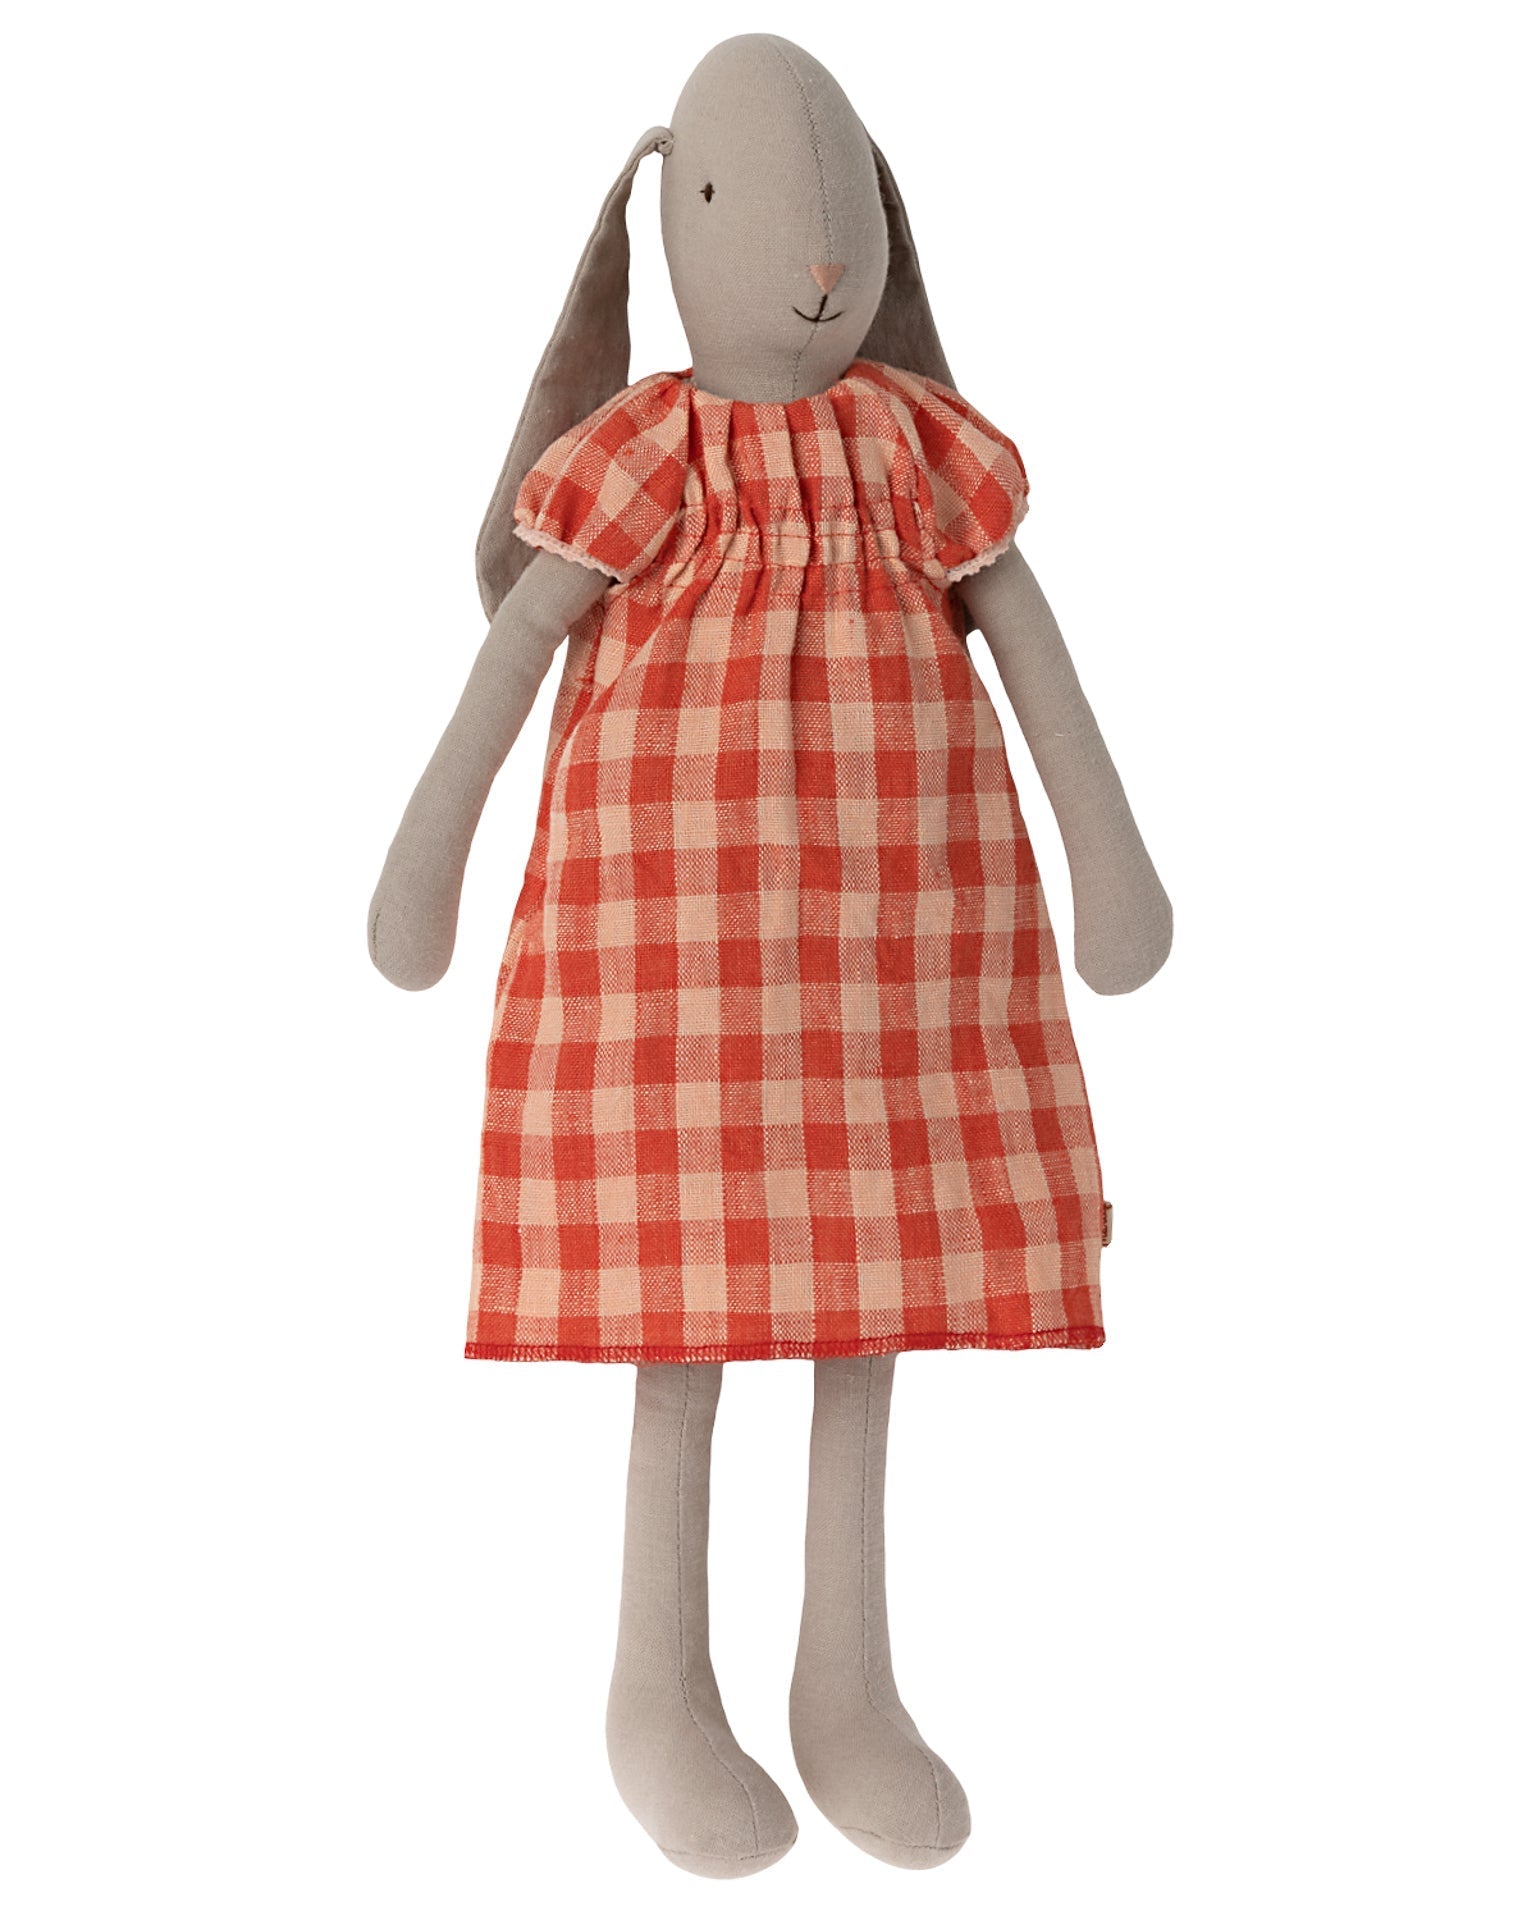 Little maileg play size 3 bunny in dress